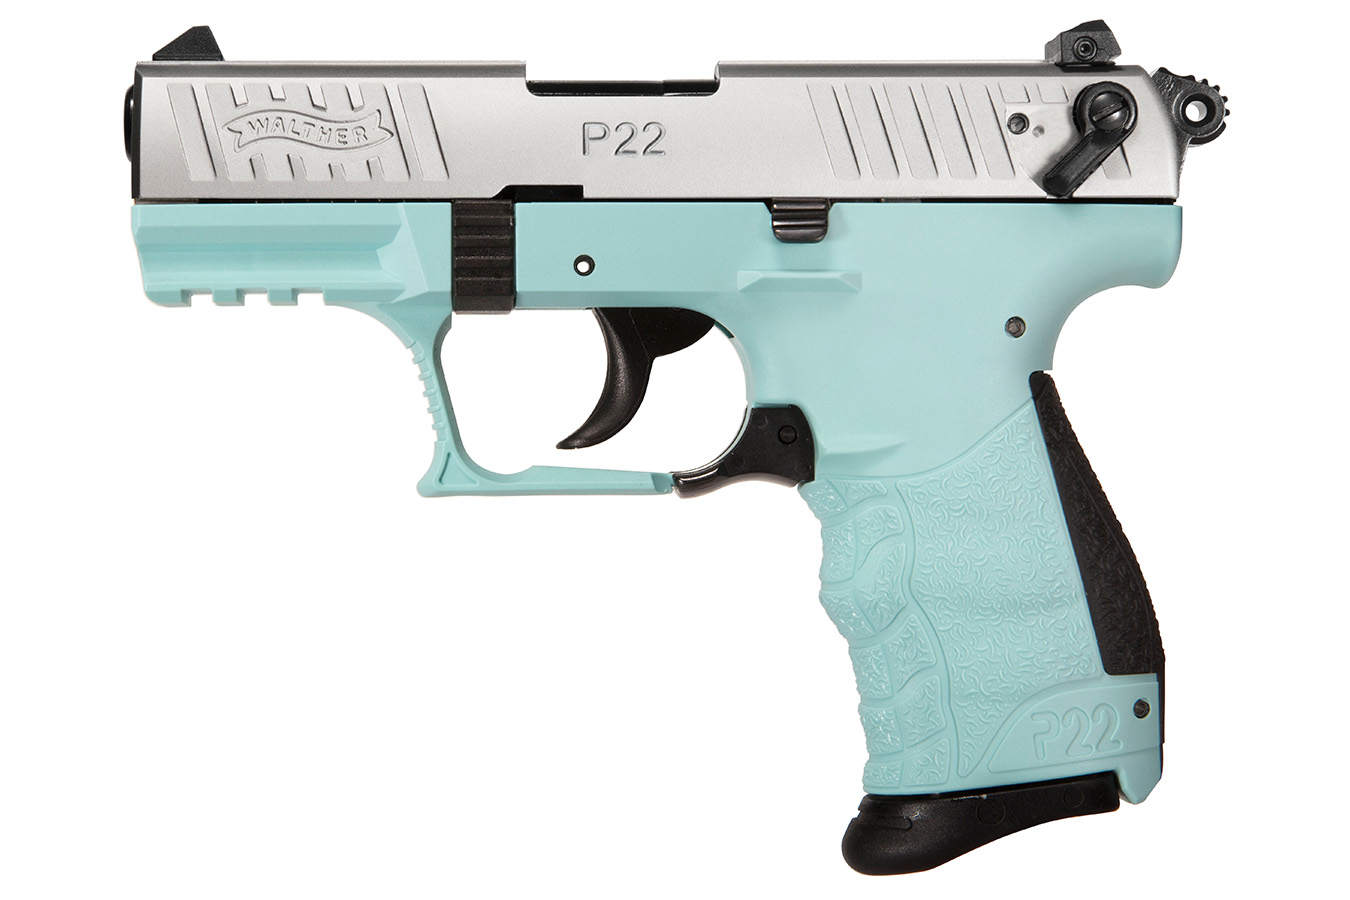 No. 14 Best Selling: WALTHER P22Q 22 LR SEMI AUTO PISTOL WITH ANGEL BLUE FRAME